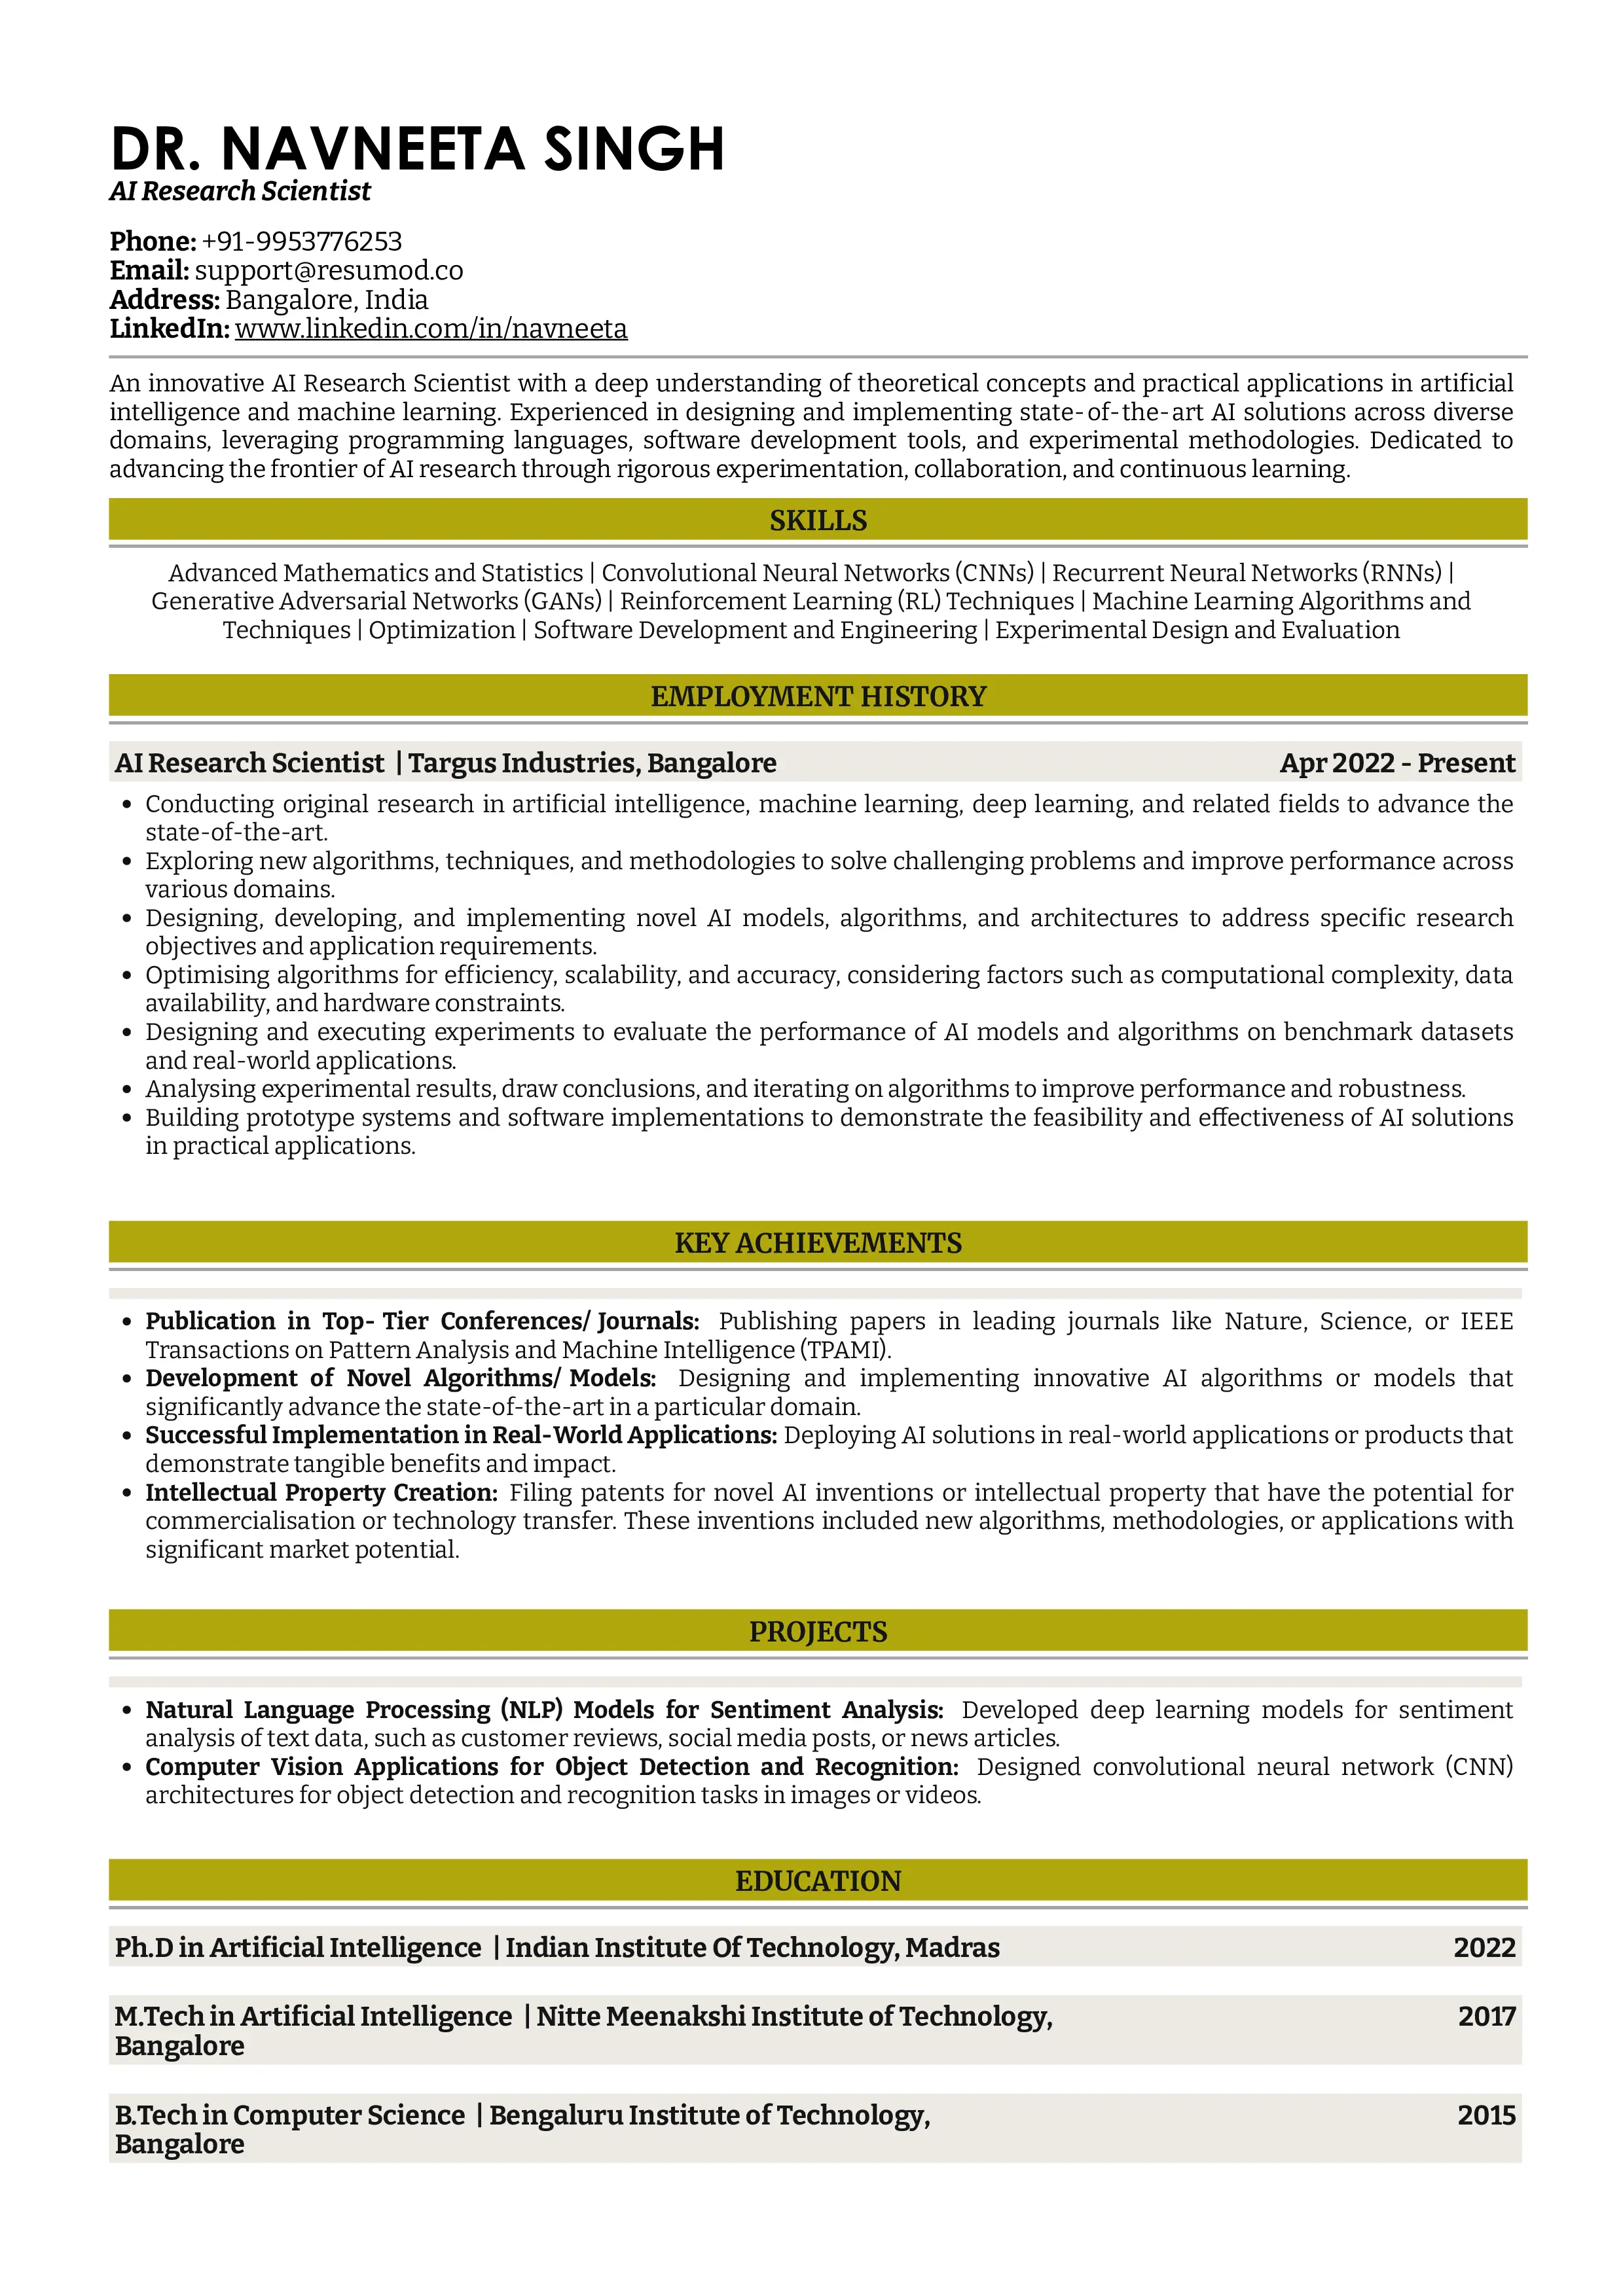 Sample Resume of  AI Research Scientist | Free Resume Templates & Samples on Resumod.co